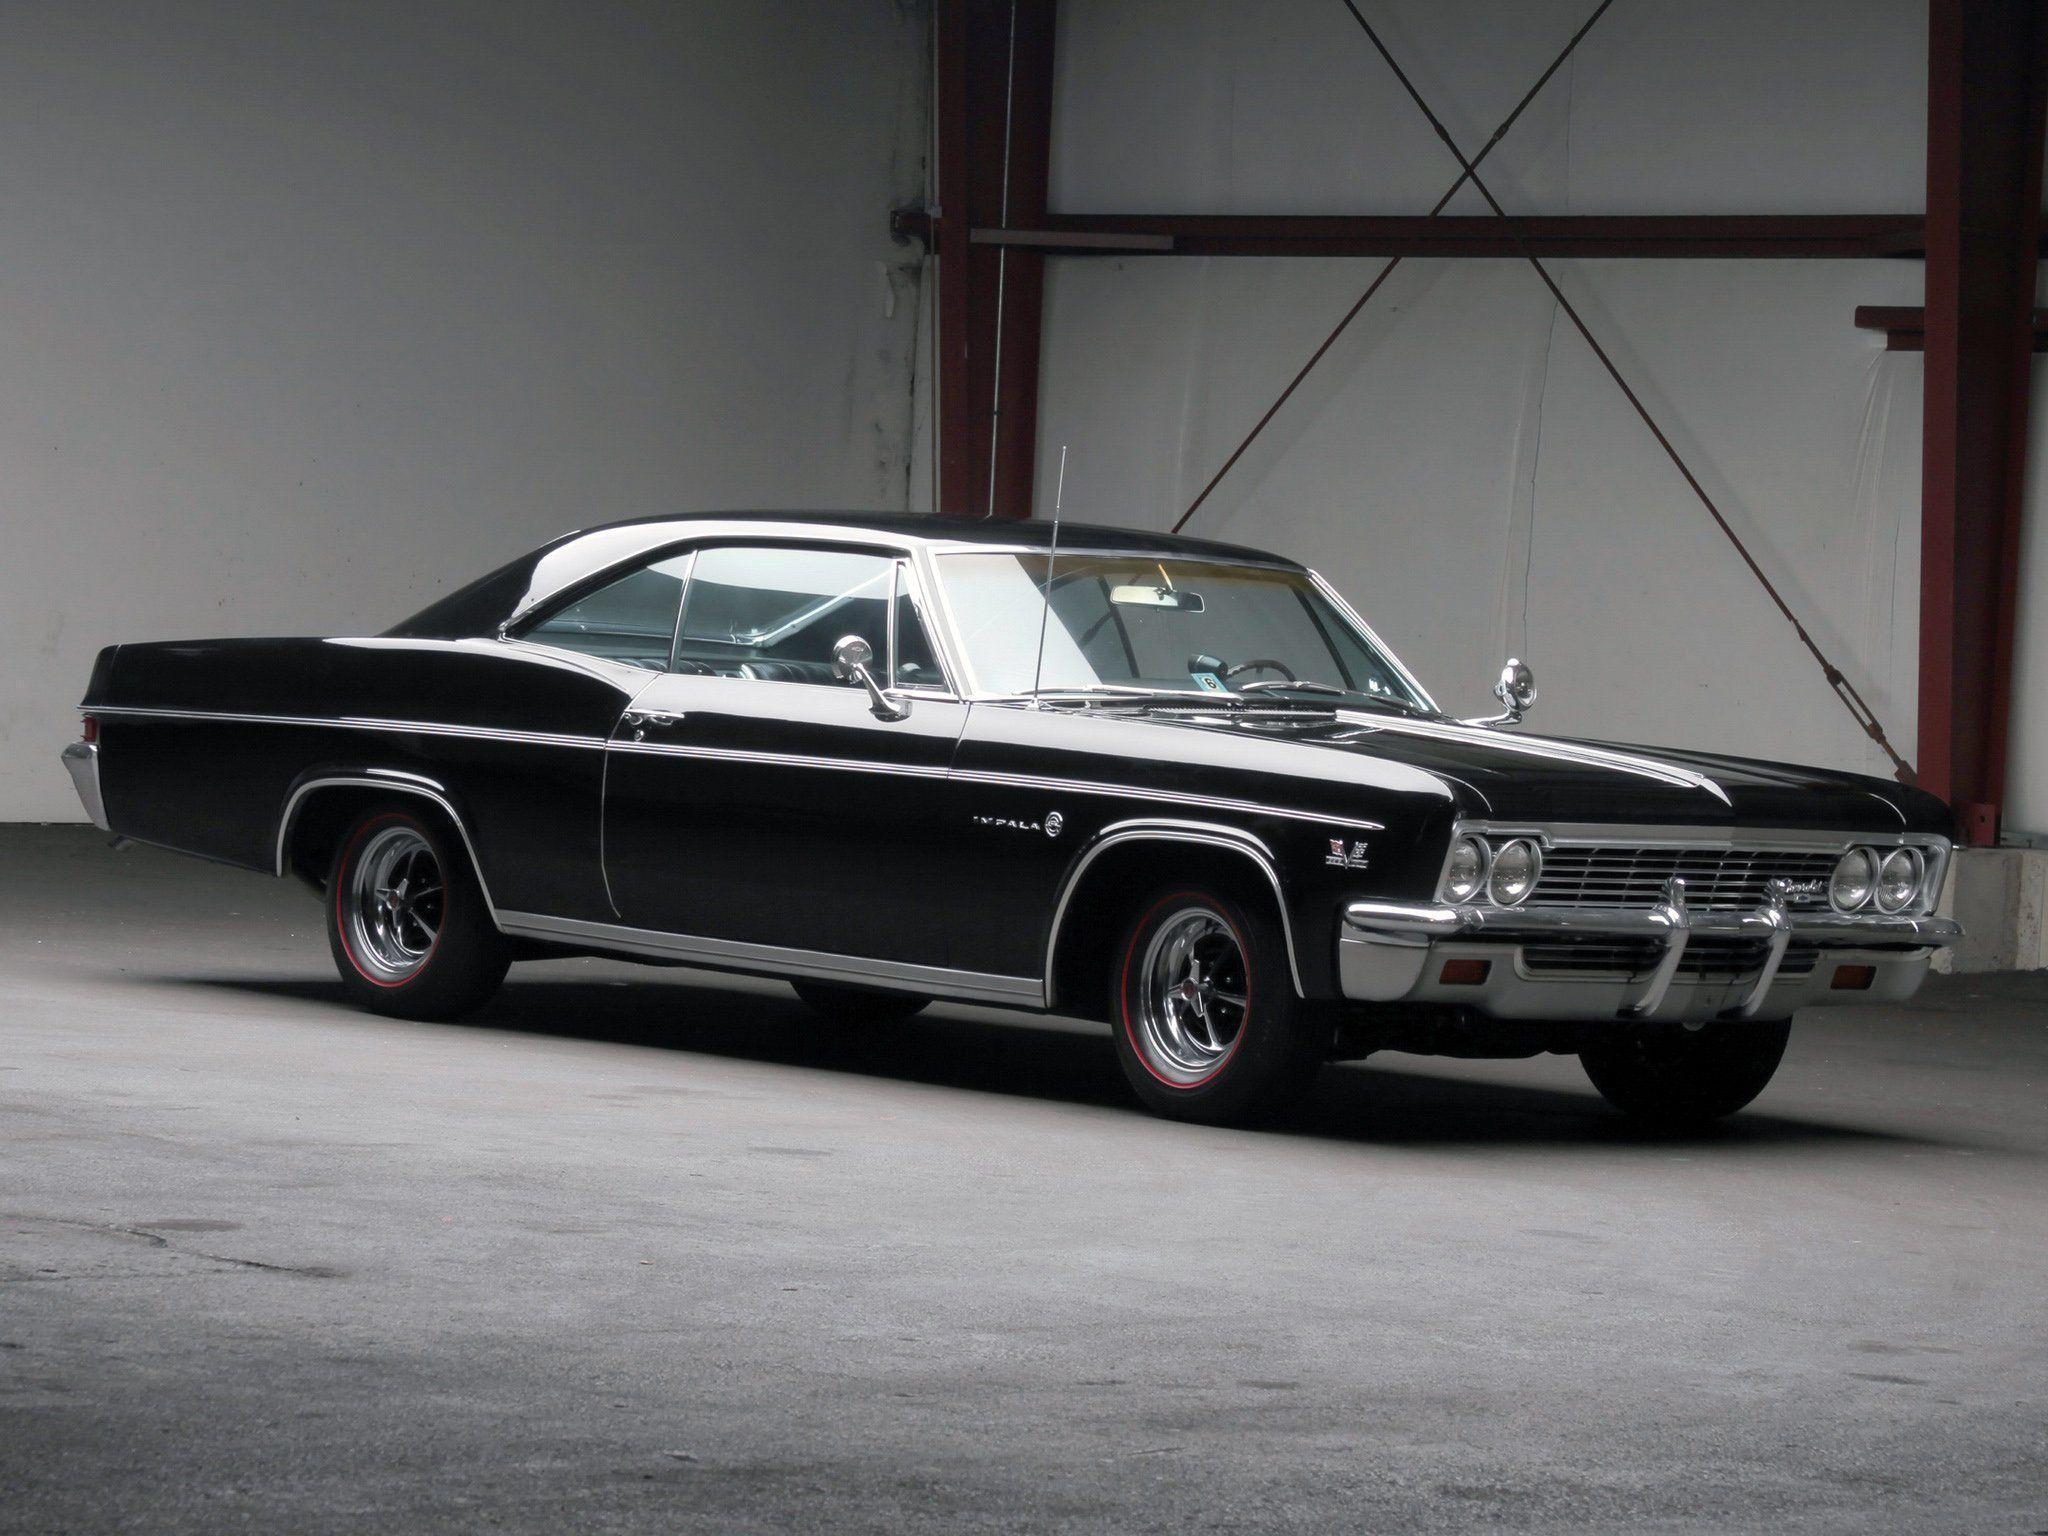 Chevrolet Impala HP Sport Coupe classic muscle g